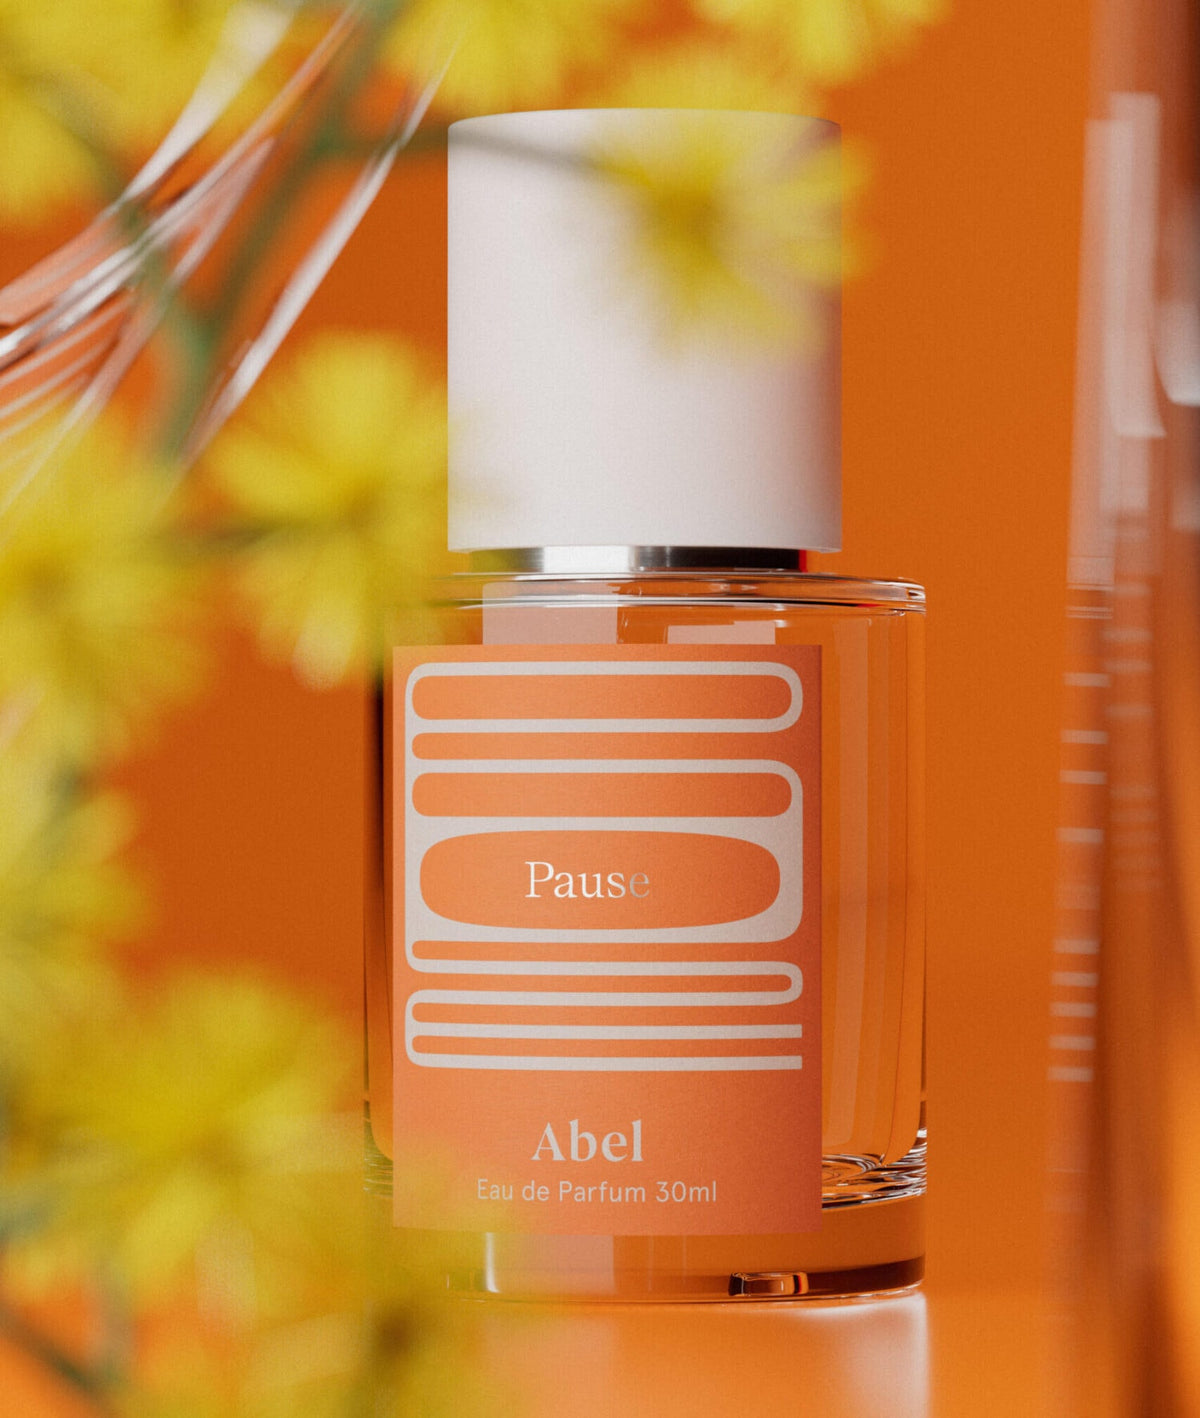 A bottle of Abel perfume with sustainable farming practices on an orange background.